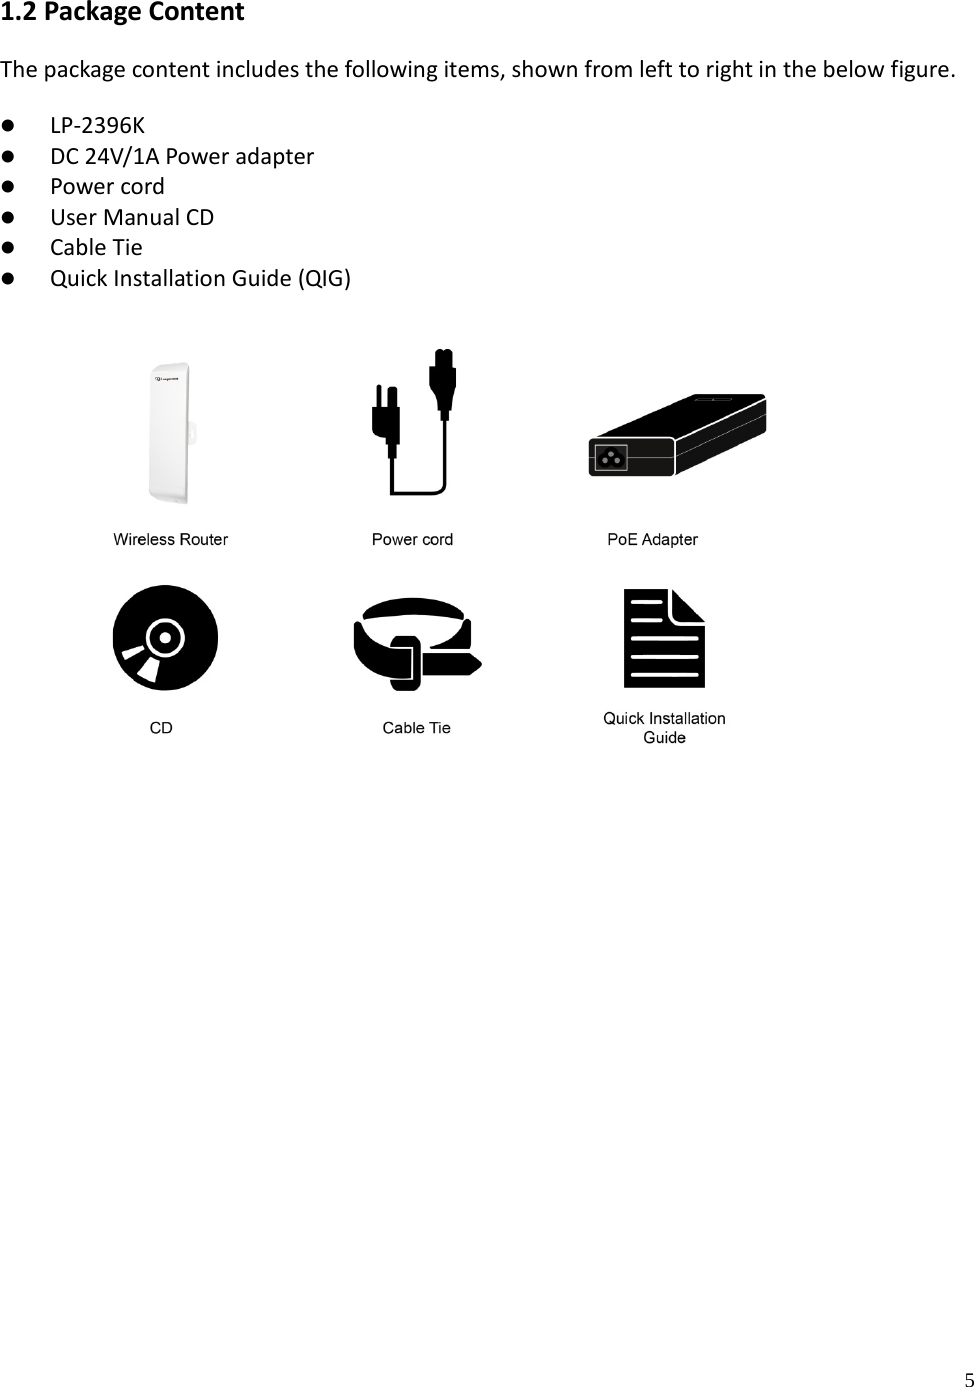 5 1.2 Package Content The package content includes the following items, shown from left to right in the below figure. LP-2396KDC 24V/1A Power adapterPower cordUser Manual CDCable TieQuick Installation Guide (QIG)